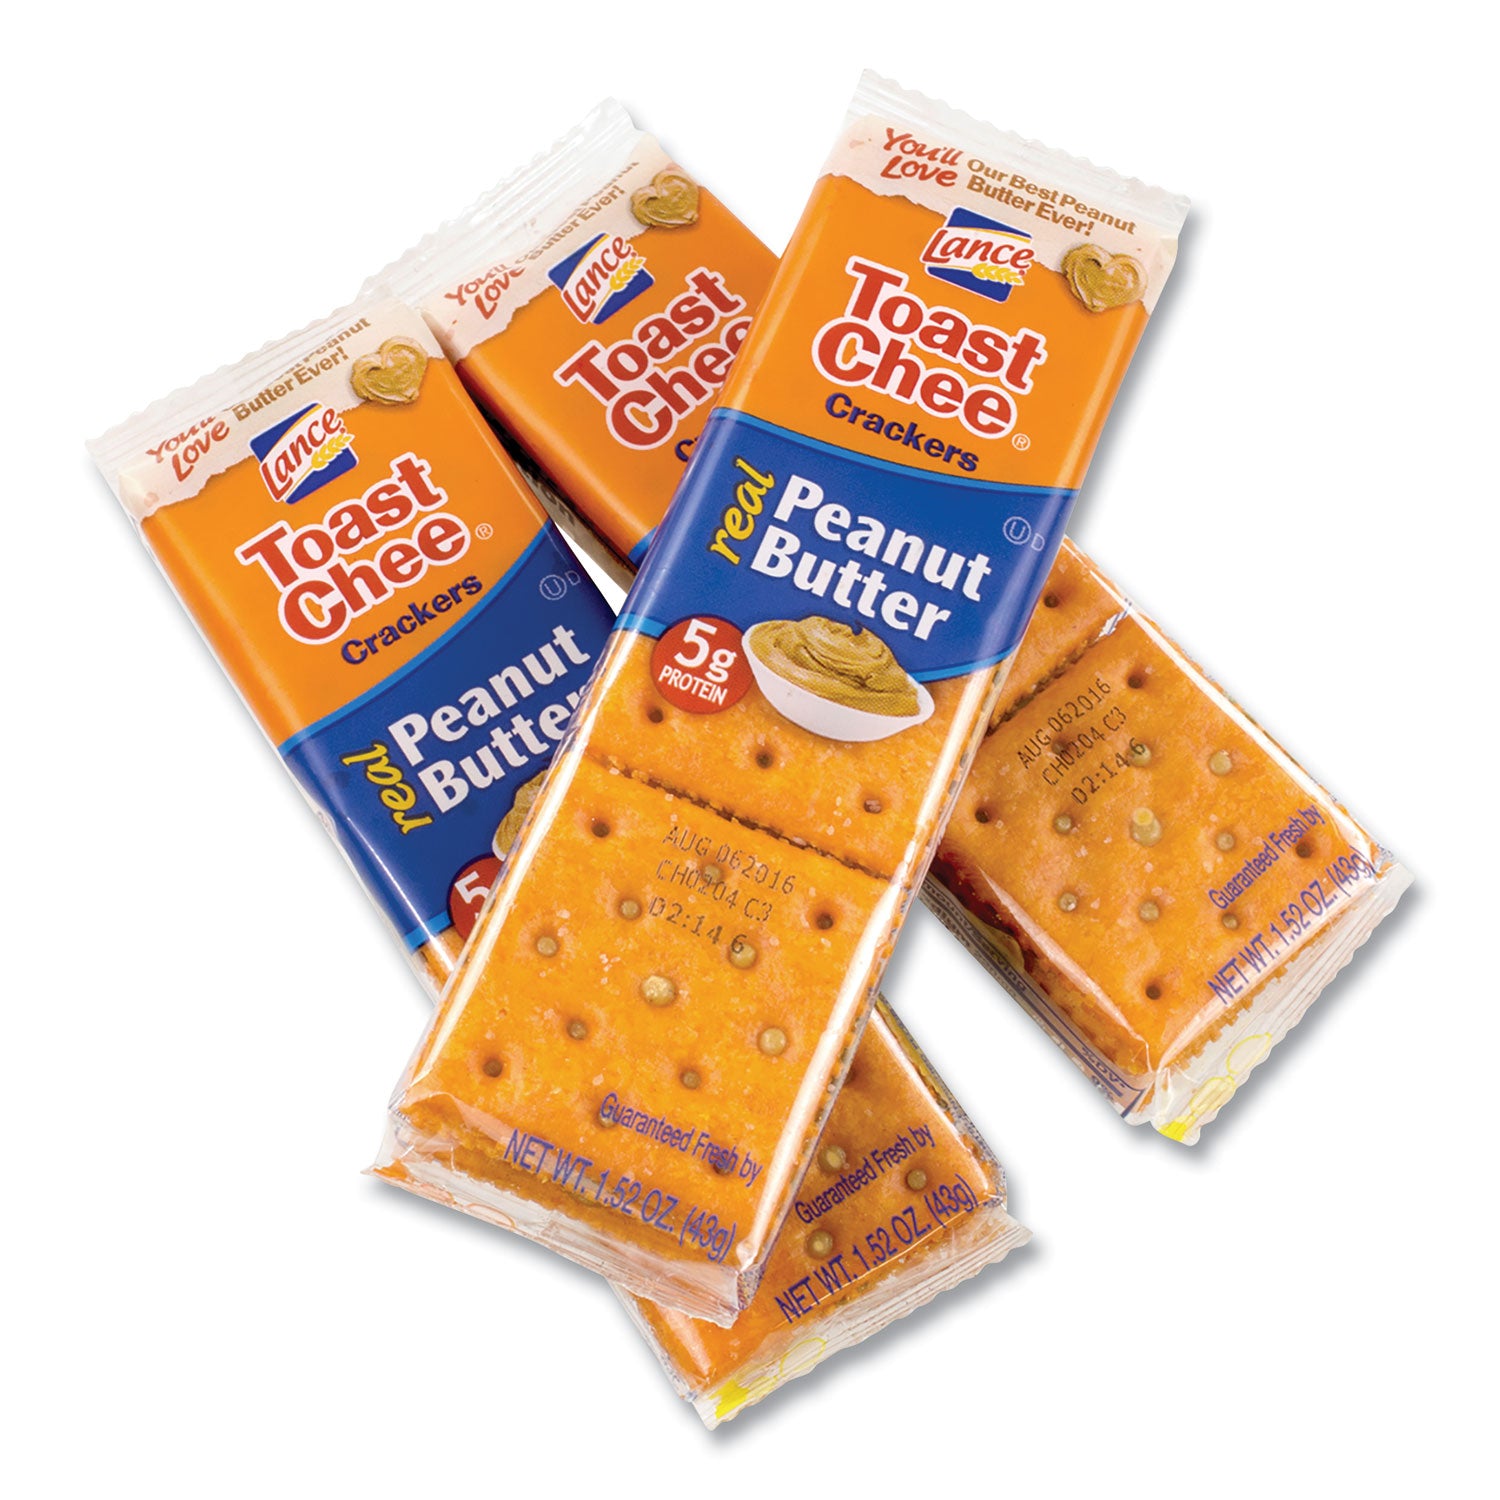 toast-chee-peanut-butter-cracker-sandwiches-152-oz-pack-40-packs-box-ships-in-1-3-business-days_grr22000542 - 1